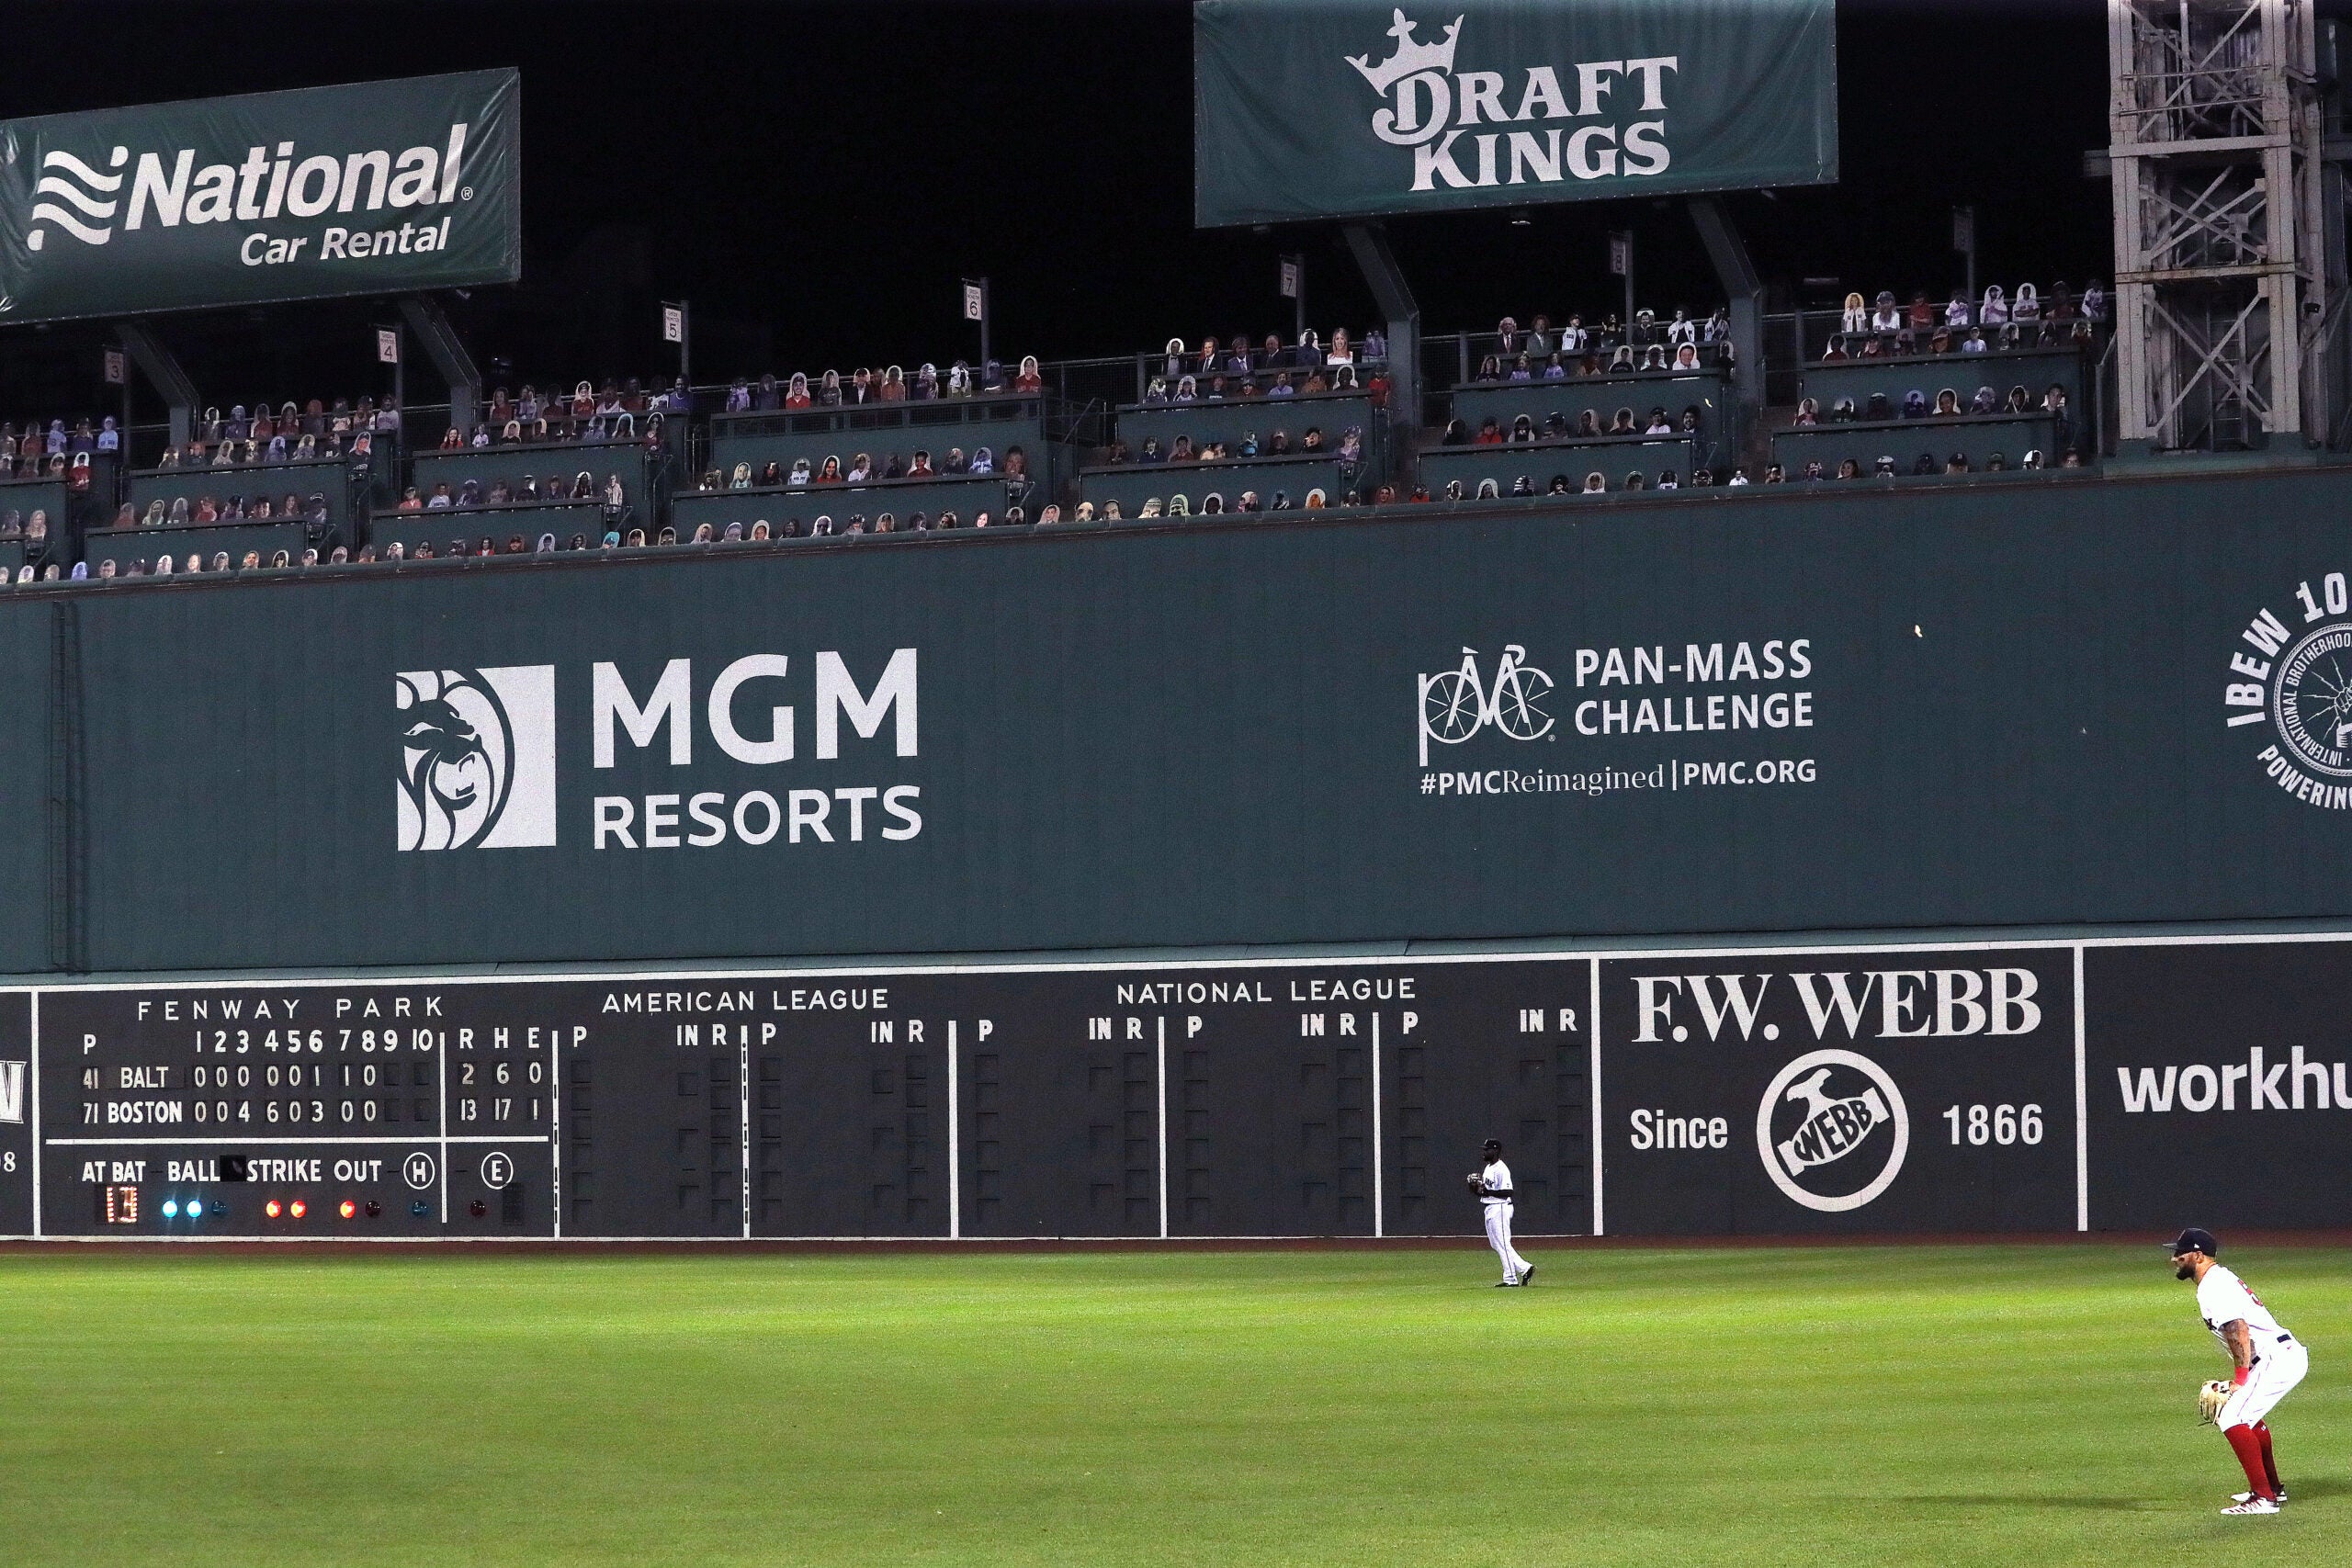 Fenway Park's Other Green Monster - Banished to the Pen